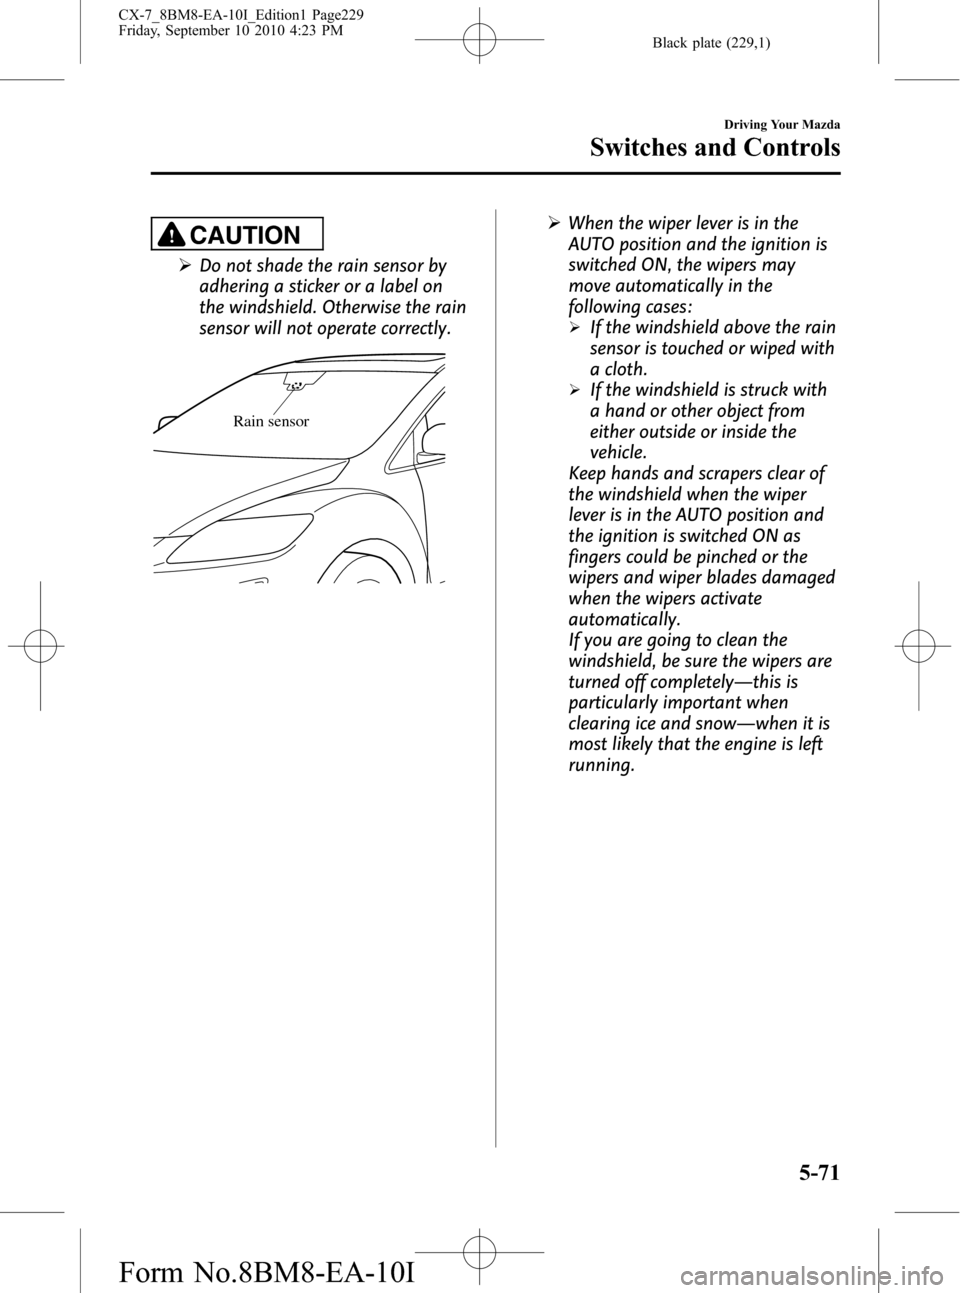 MAZDA MODEL CX-7 2011  Owners Manual (in English) Black plate (229,1)
CAUTION
ØDo not shade the rain sensor by
adhering a sticker or a label on
the windshield. Otherwise the rain
sensor will not operate correctly.
Rain sensor
ØWhen the wiper lever 